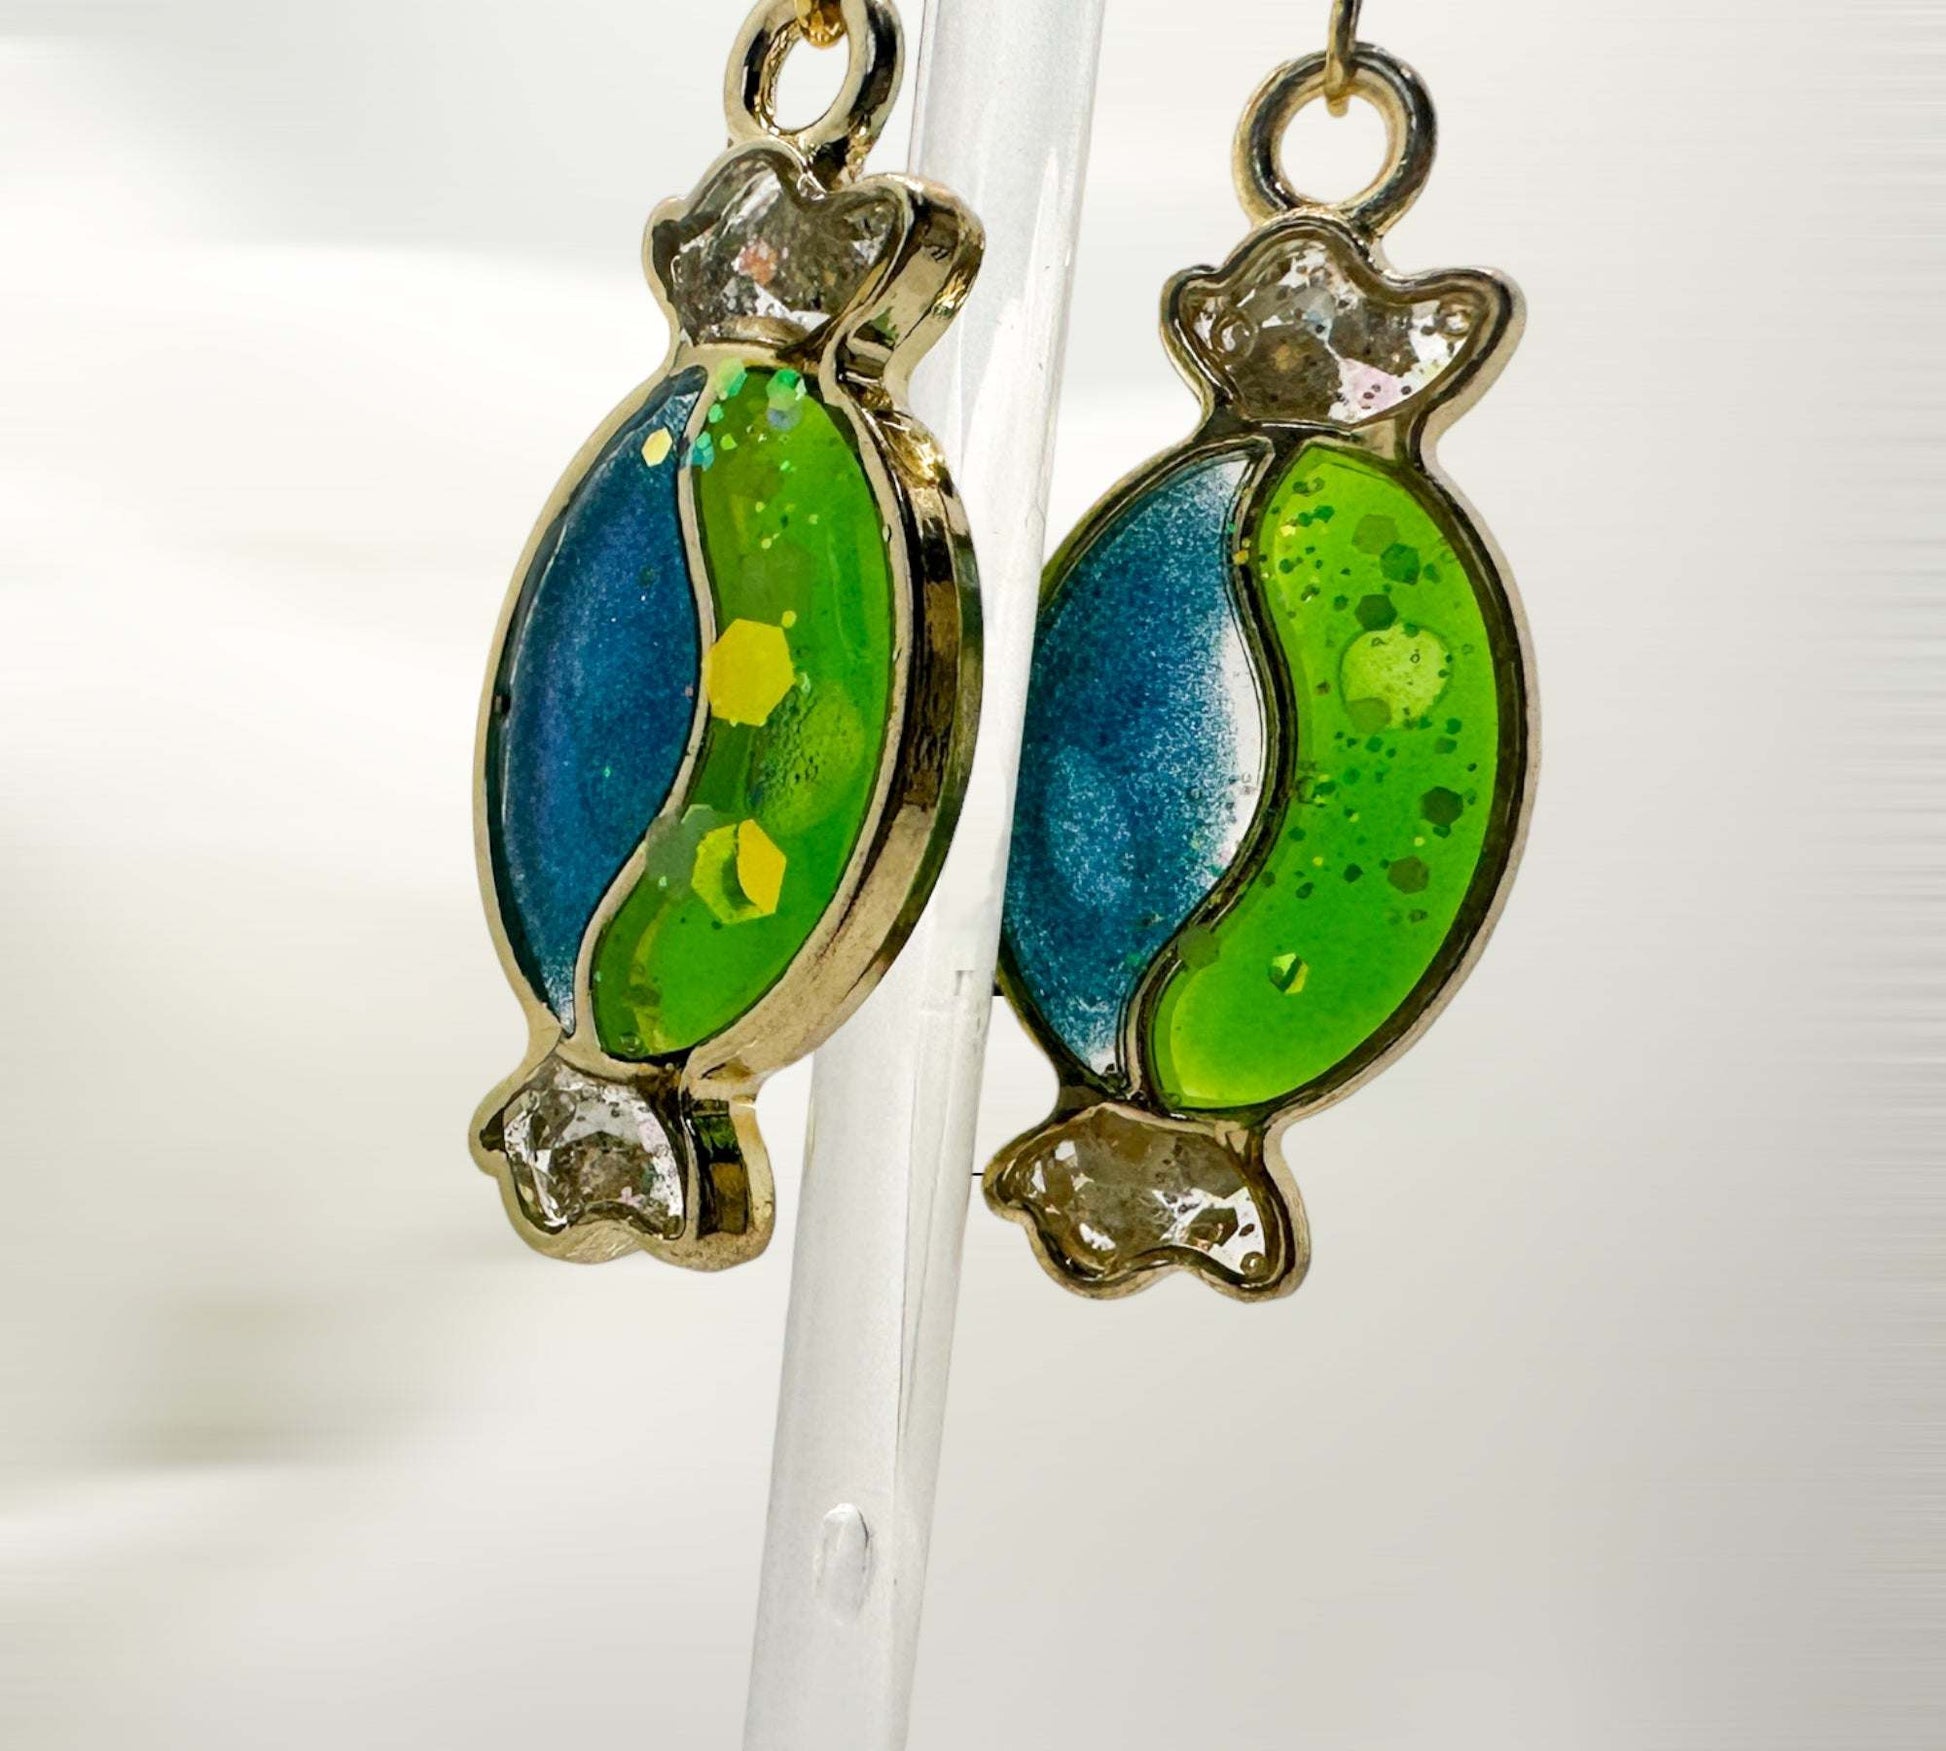 Candy Drop Whimsical Glow in the Dark Candy Drop Earrings